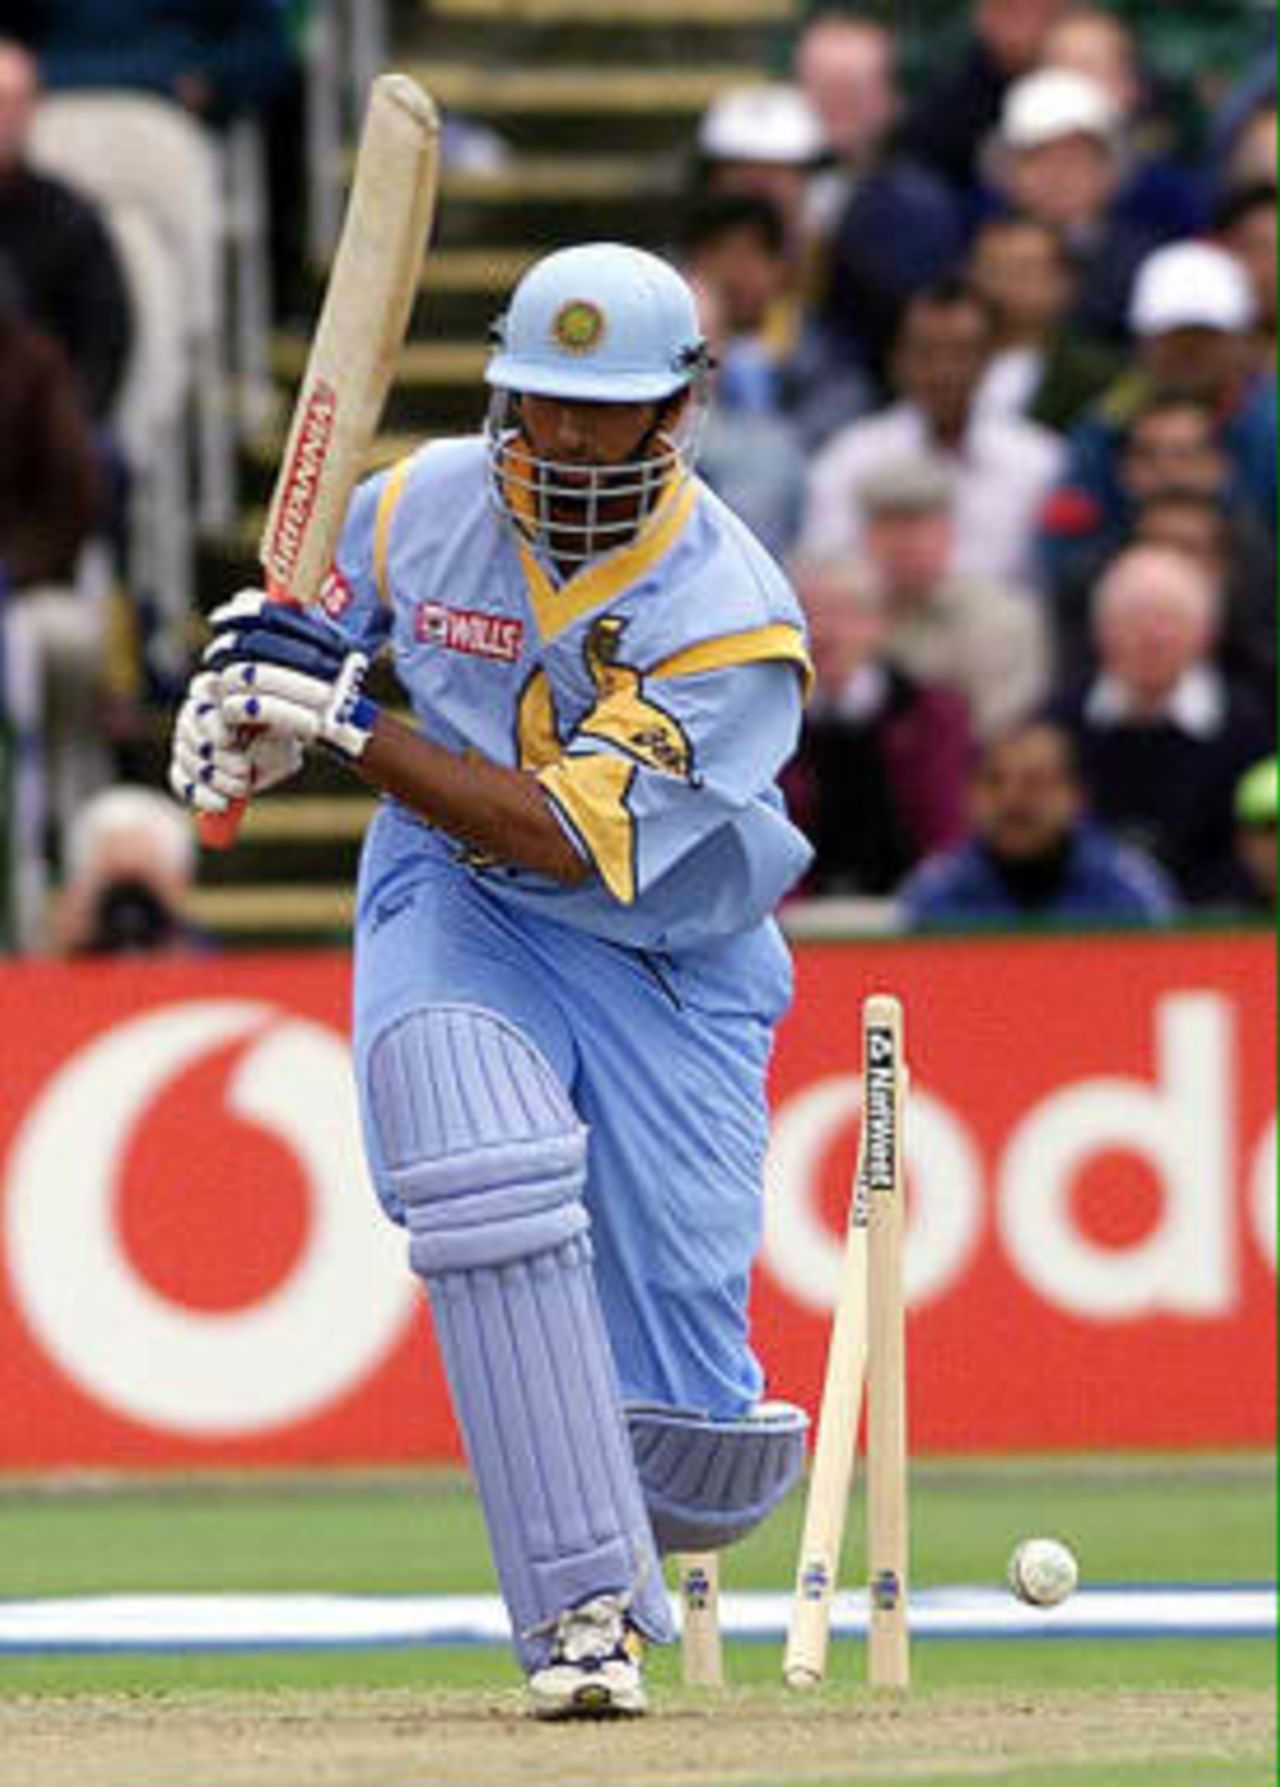 India's opening batsman Sadagopan Ramesh is out off Pakistan's Abdur Razzaq 08 June 1999, during the Cricket World Cup match at Old Trafford, Manchester